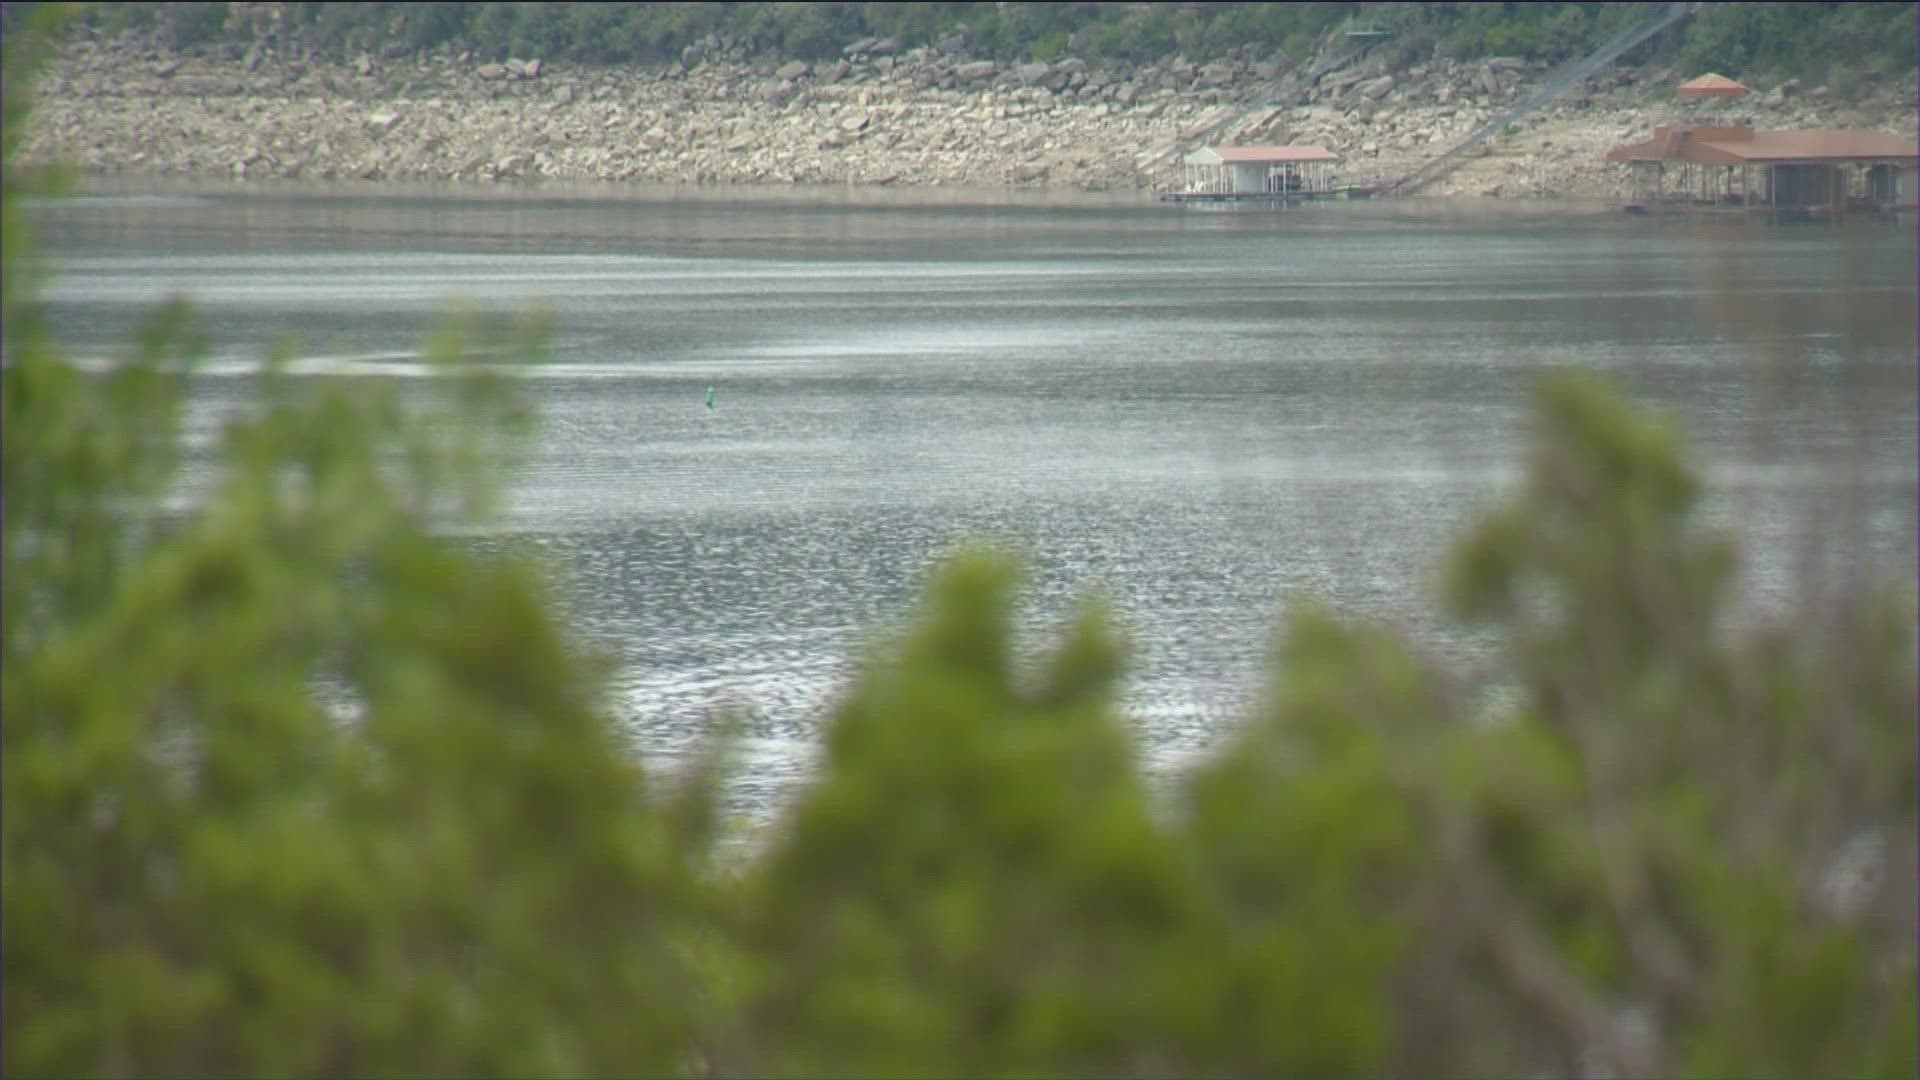 Even though Austin saw plenty of rain on Monday, the lake levels didn't really improve.